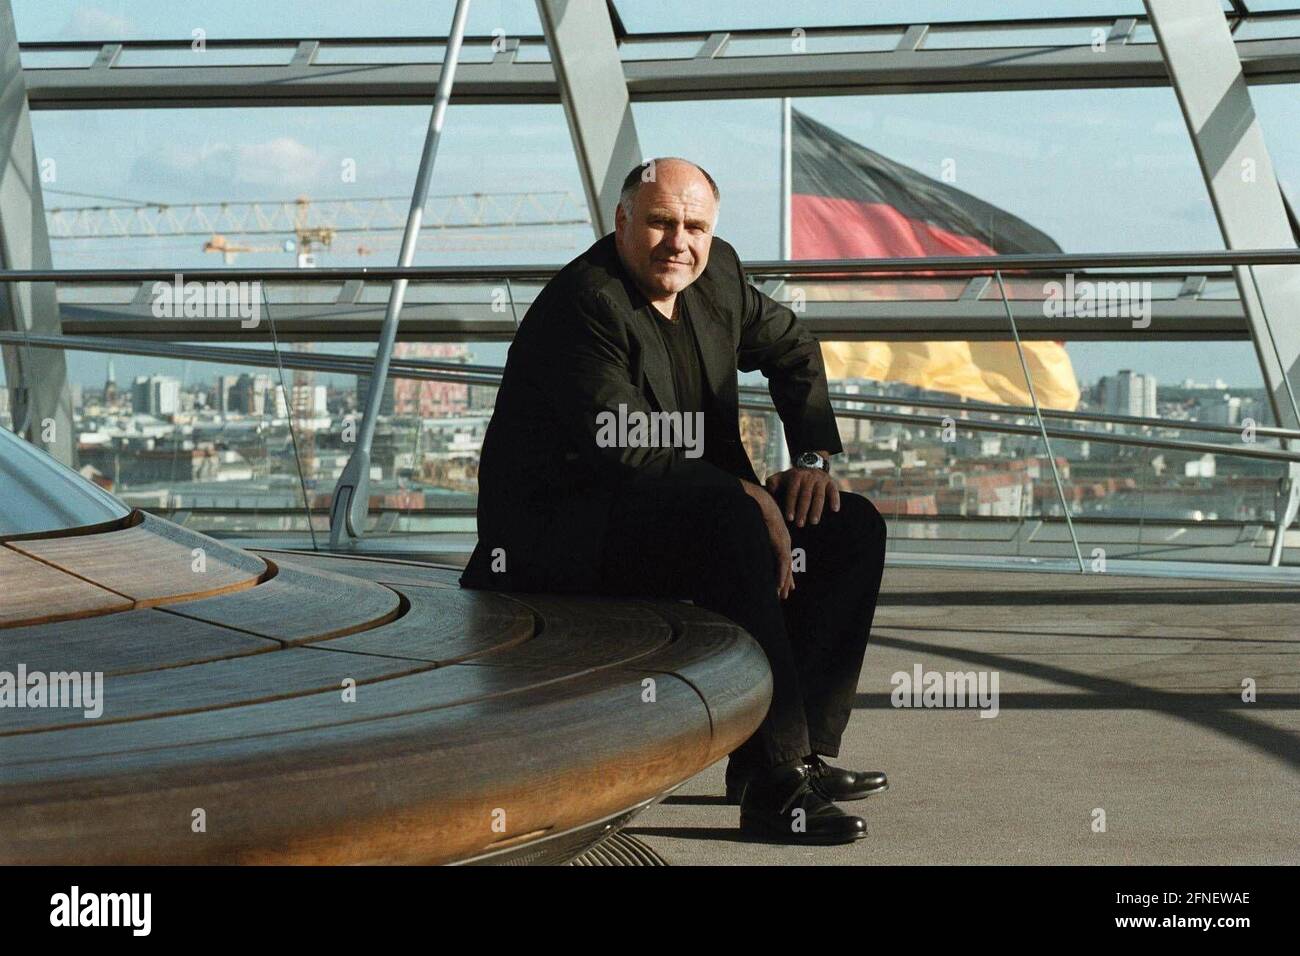 Rezzo Schlauch, parliamentary party leader of Bündnis 90/Die Grünen, in the glass dome of the Reichstag building in Berlin. [automated translation] Stock Photo